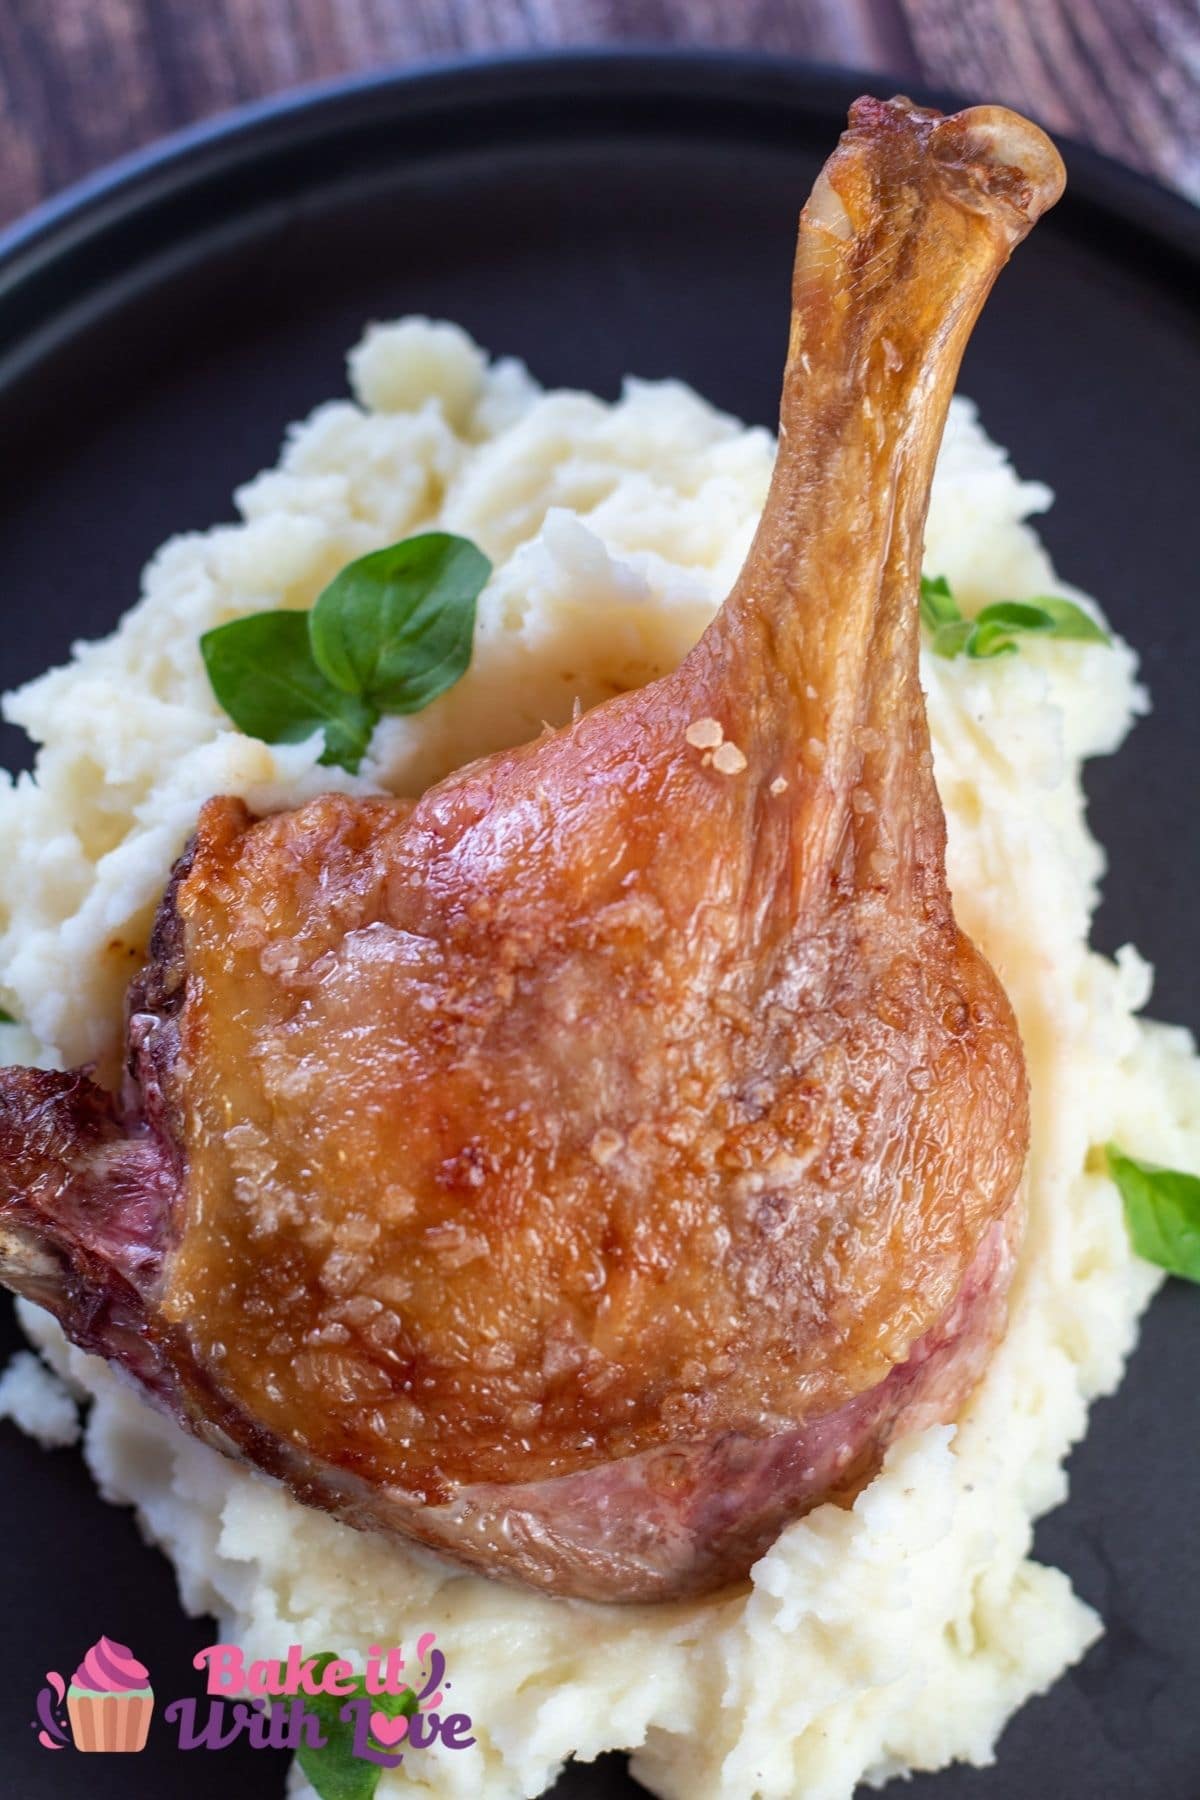 Tall image of a duck leg on a pile of mashed potatoes.